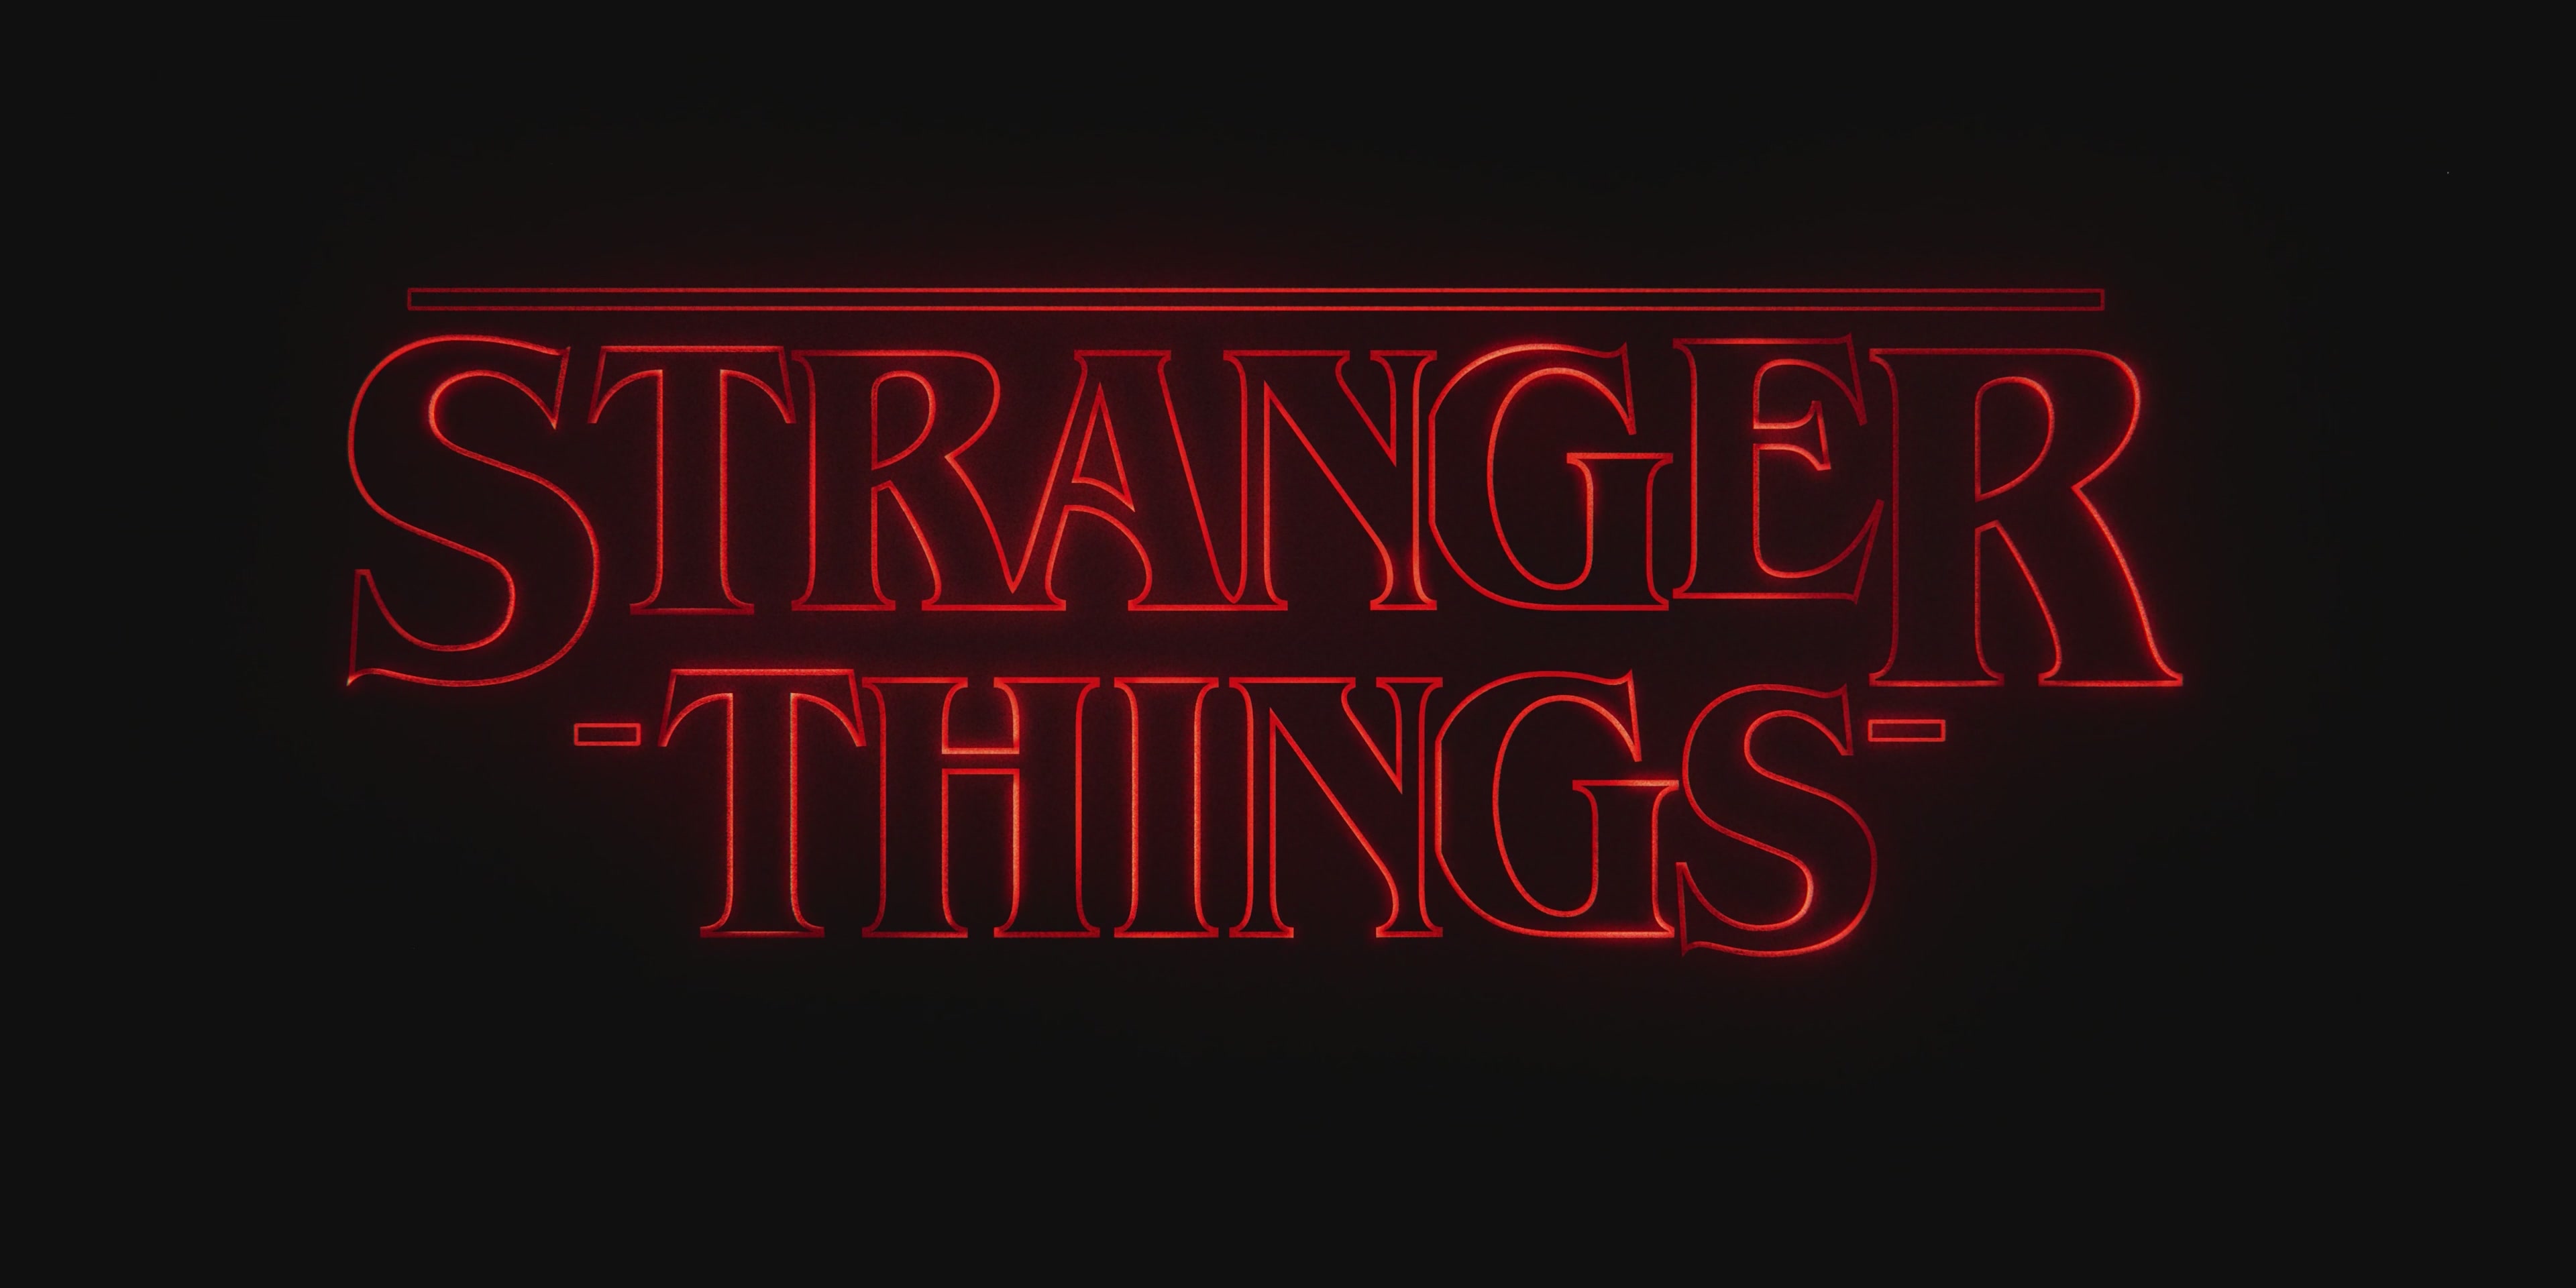 ‘Stranger Things’ Ultra HD Screen Captures